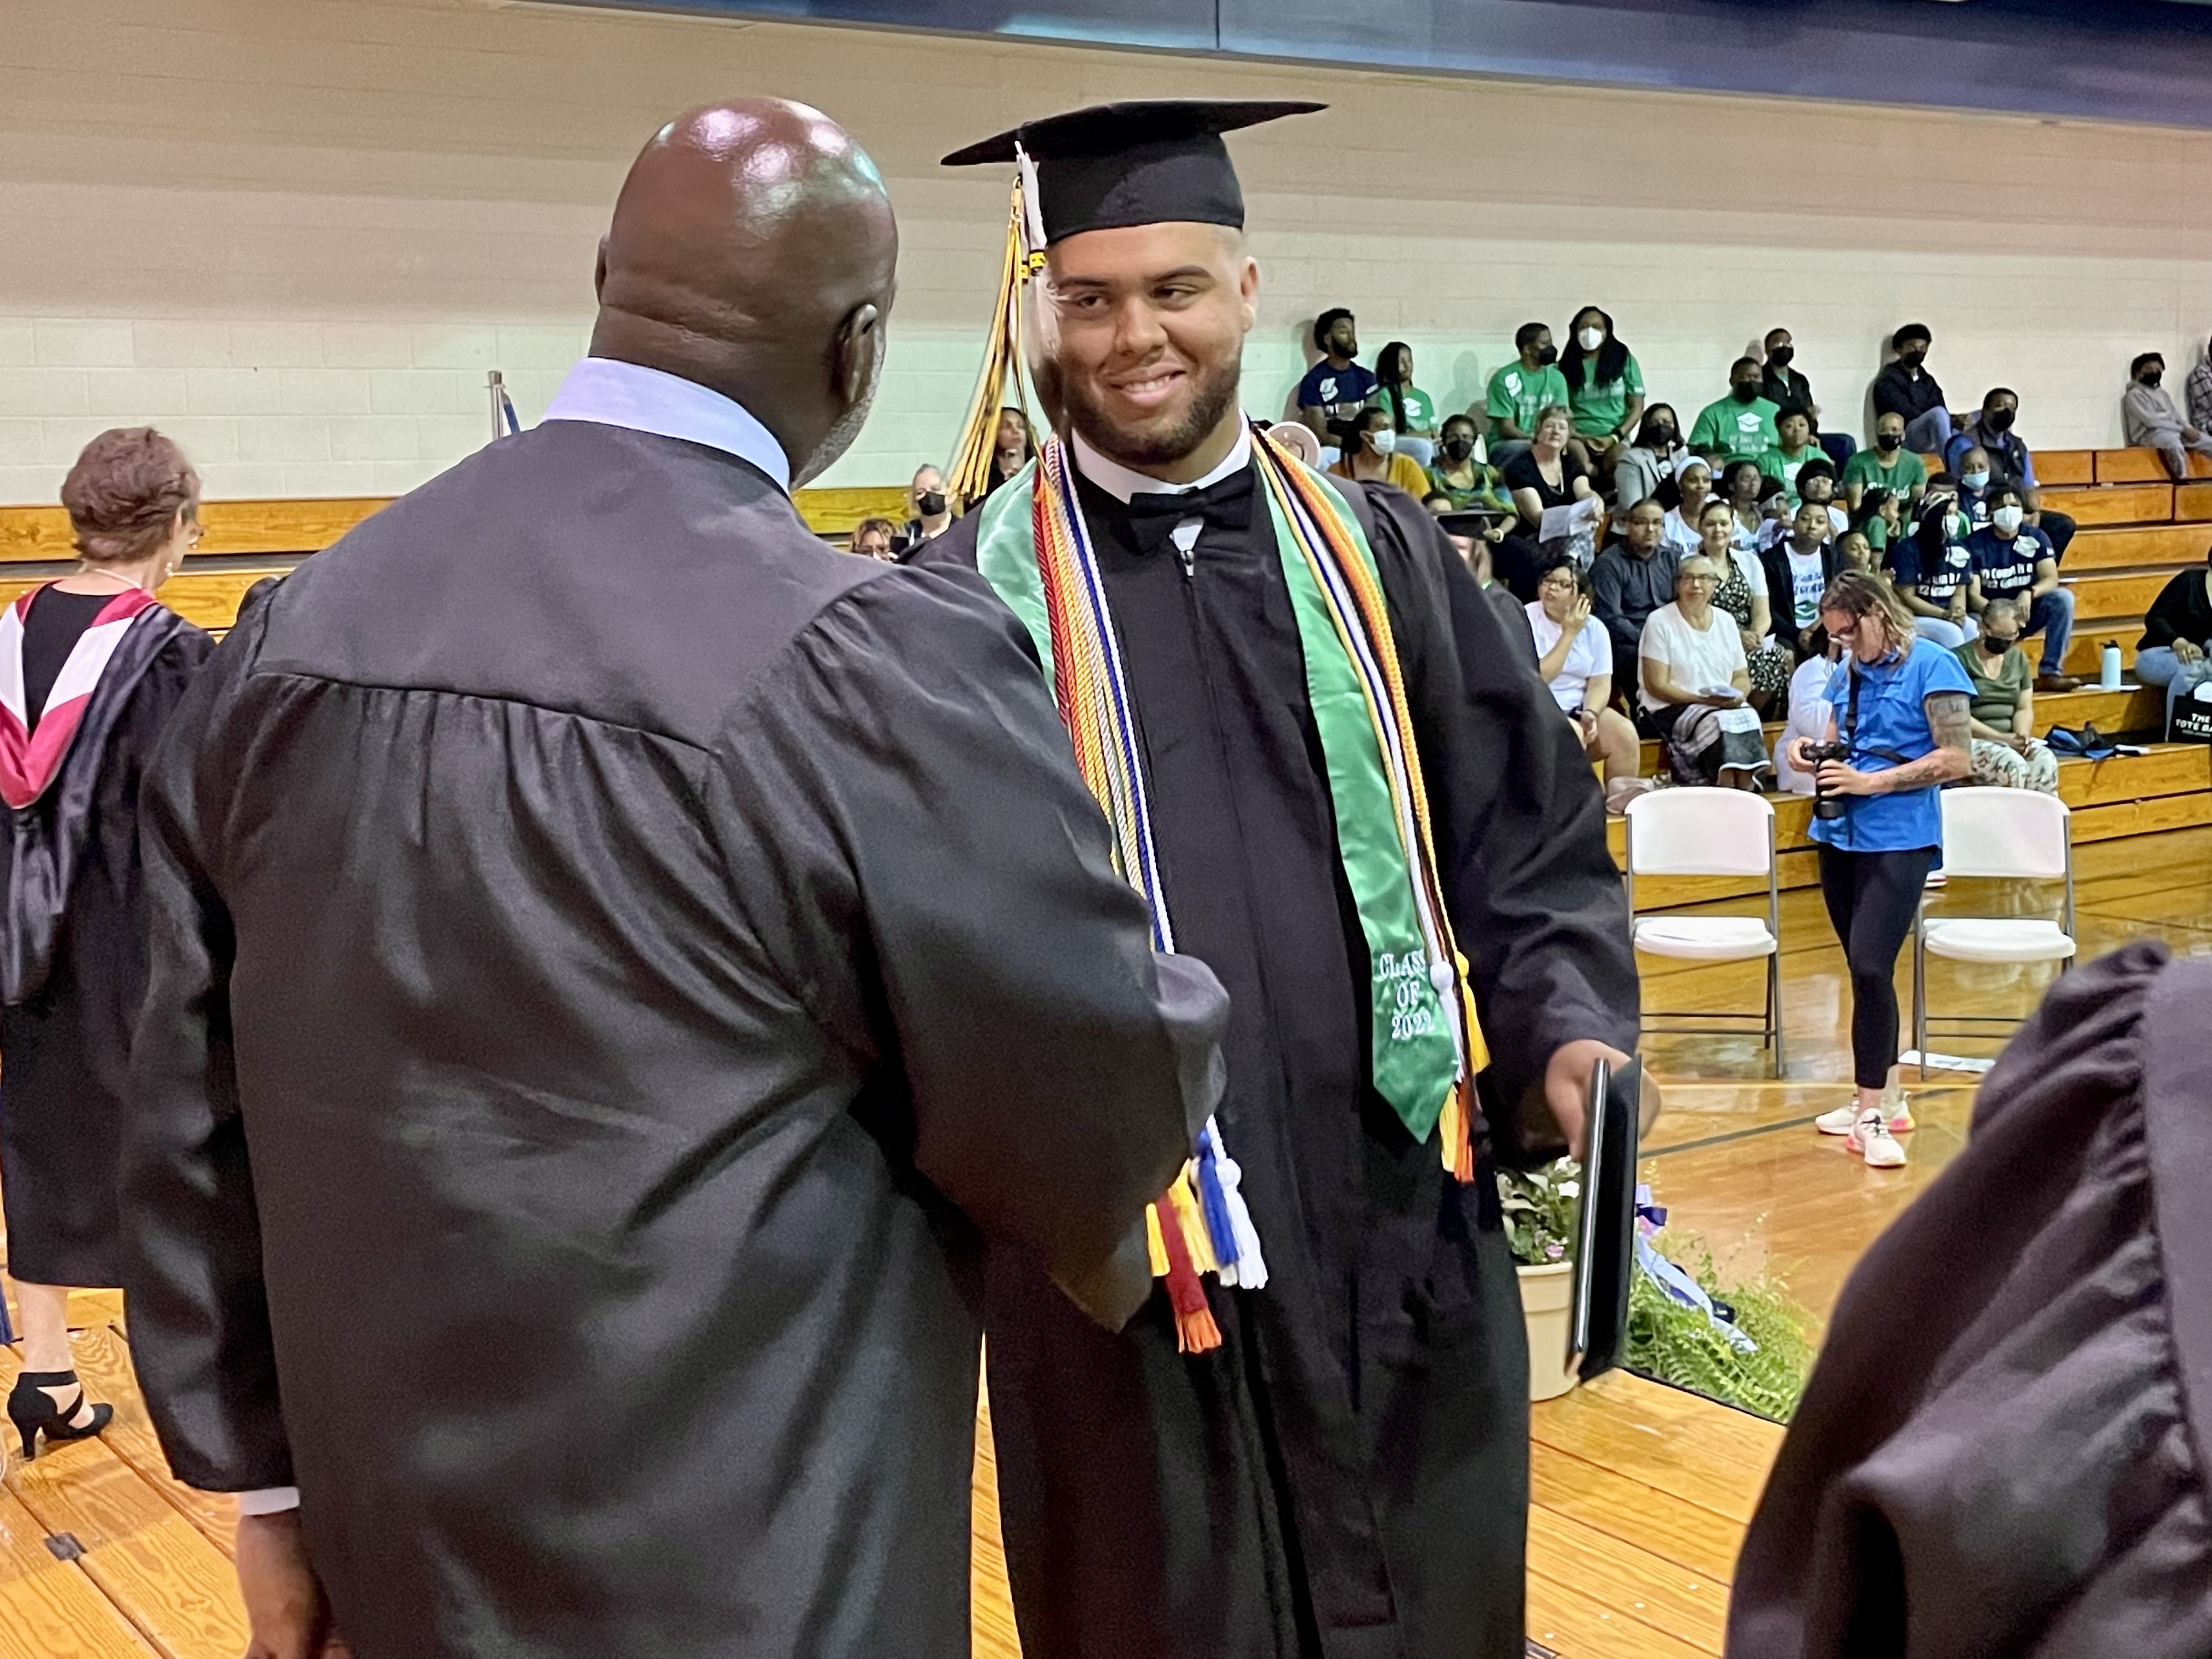 Superintendent Sutton shaking hands with a graduate receiving a diploma